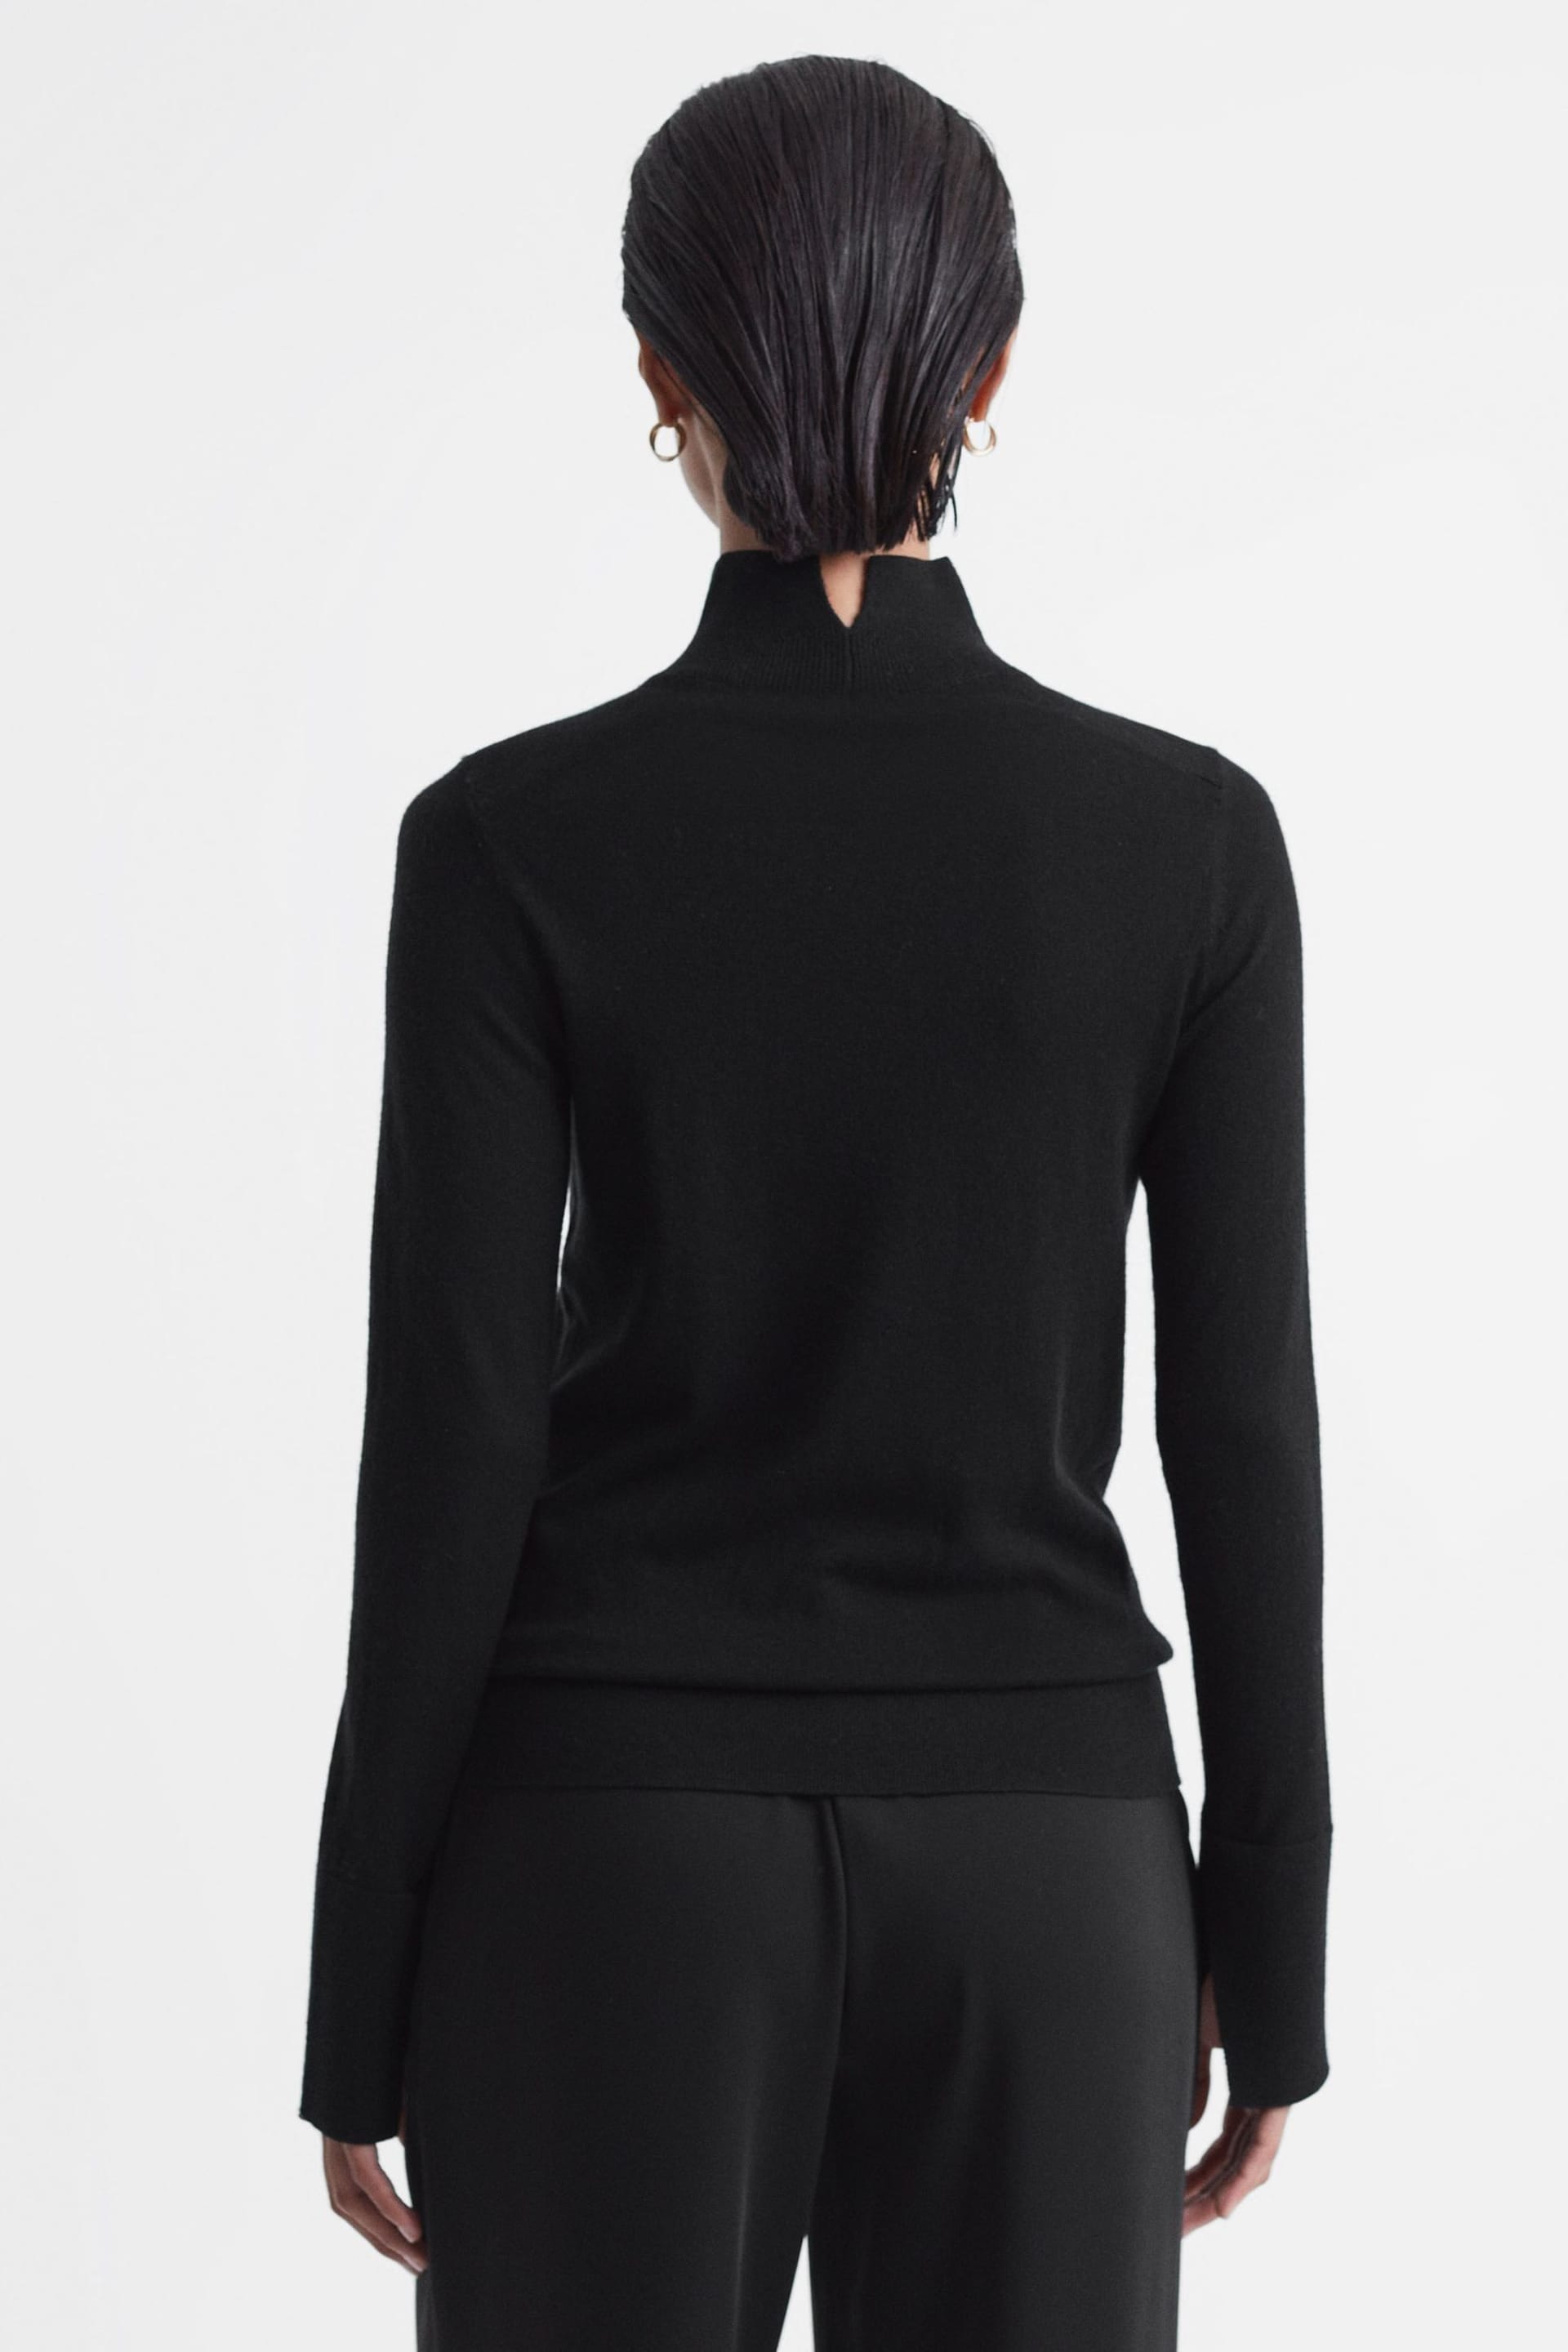 Reiss Black Kylie Merino Wool Fitted Funnel Neck Top - Image 5 of 5